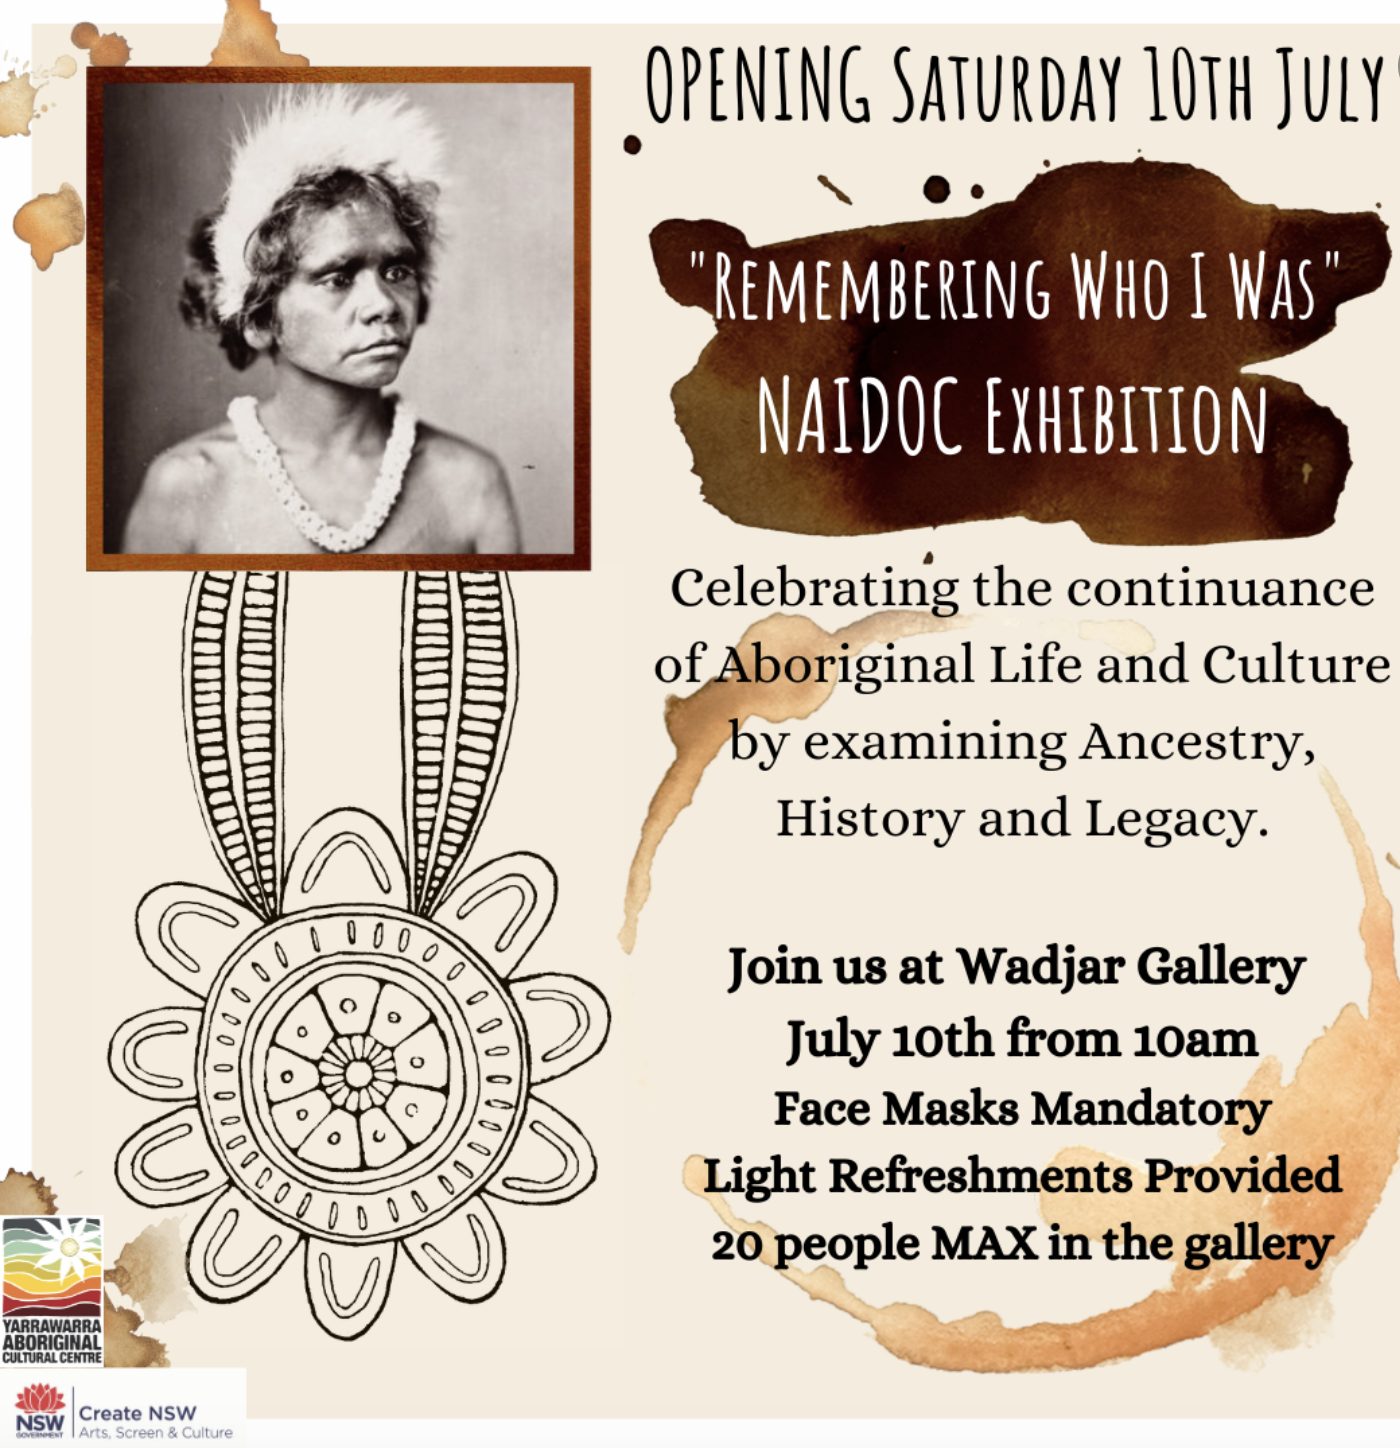 ‘Remembering Who I Was’ NAIDOC Exhibition